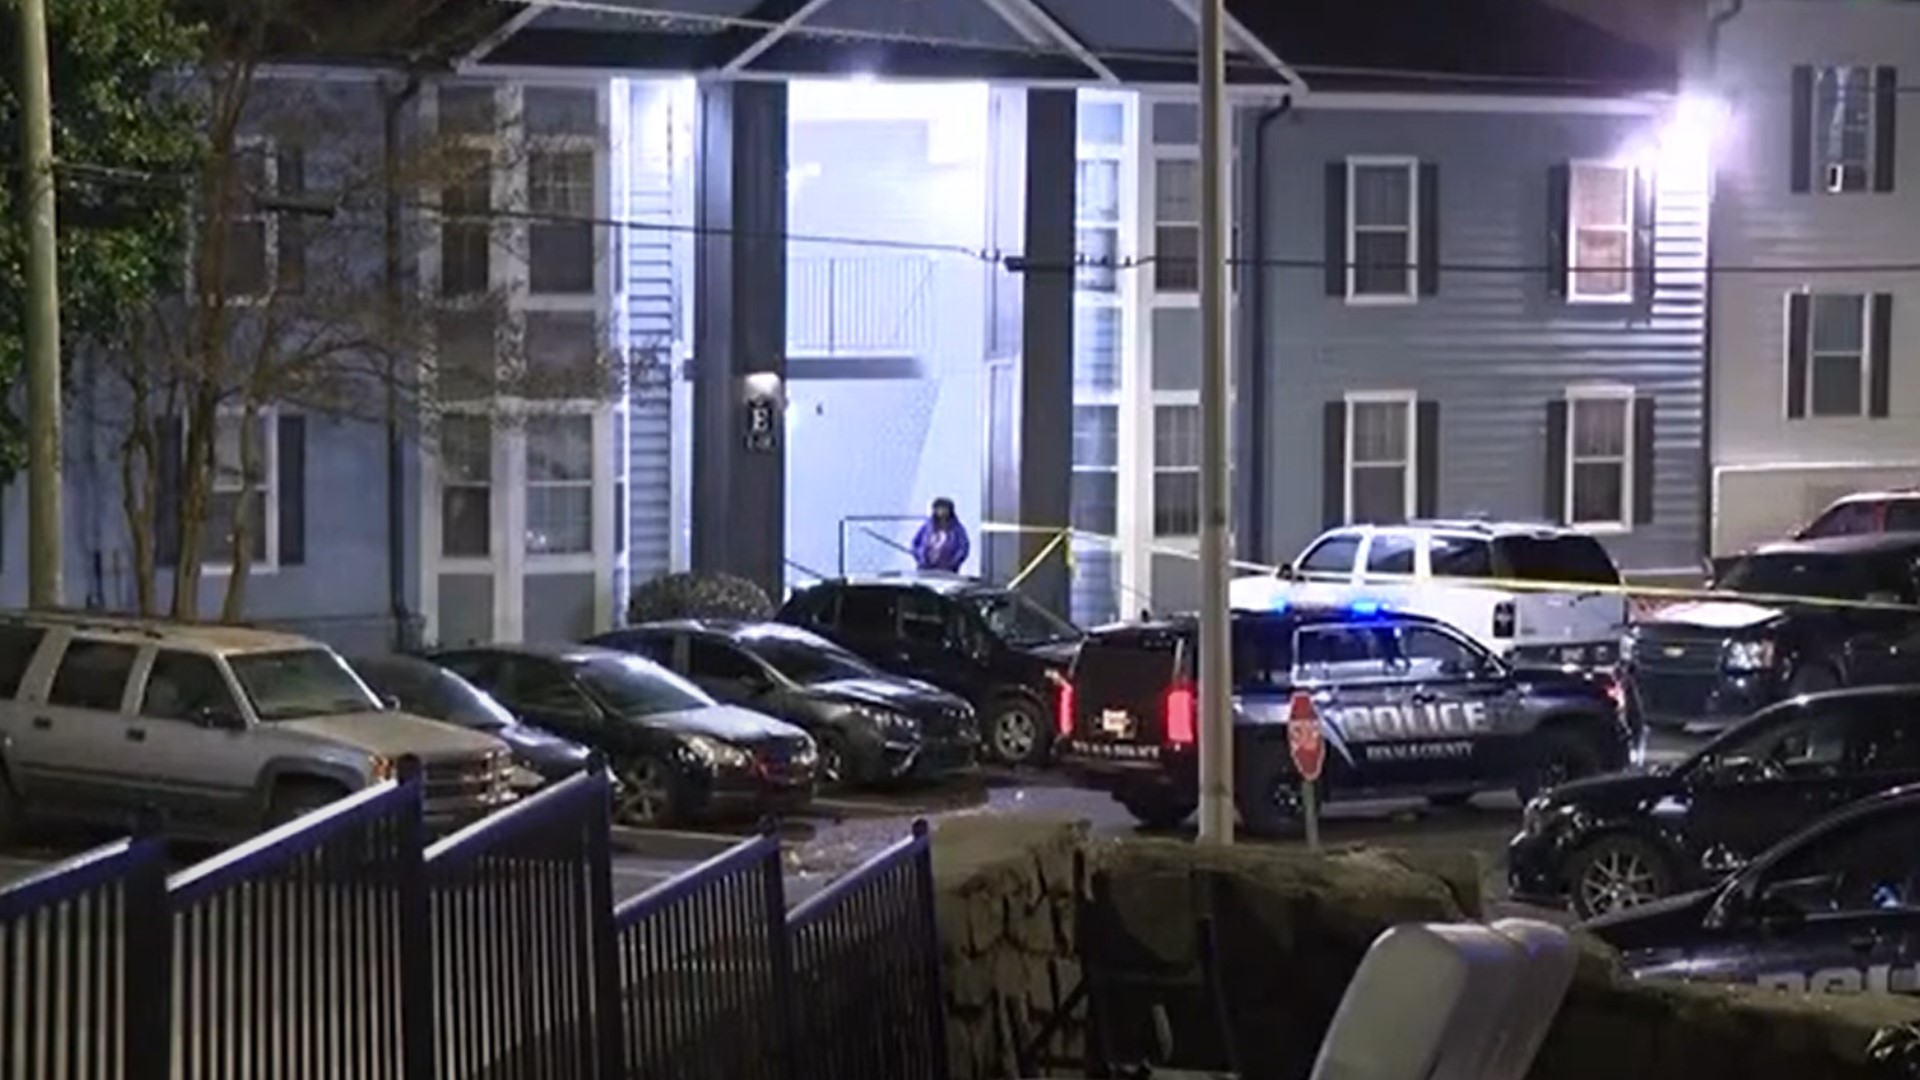 Additionally, a 16-year-old boy was rushed to the hospital after he was shot in the hand and an 11-year-old boy was also admitted after his finger was shot.